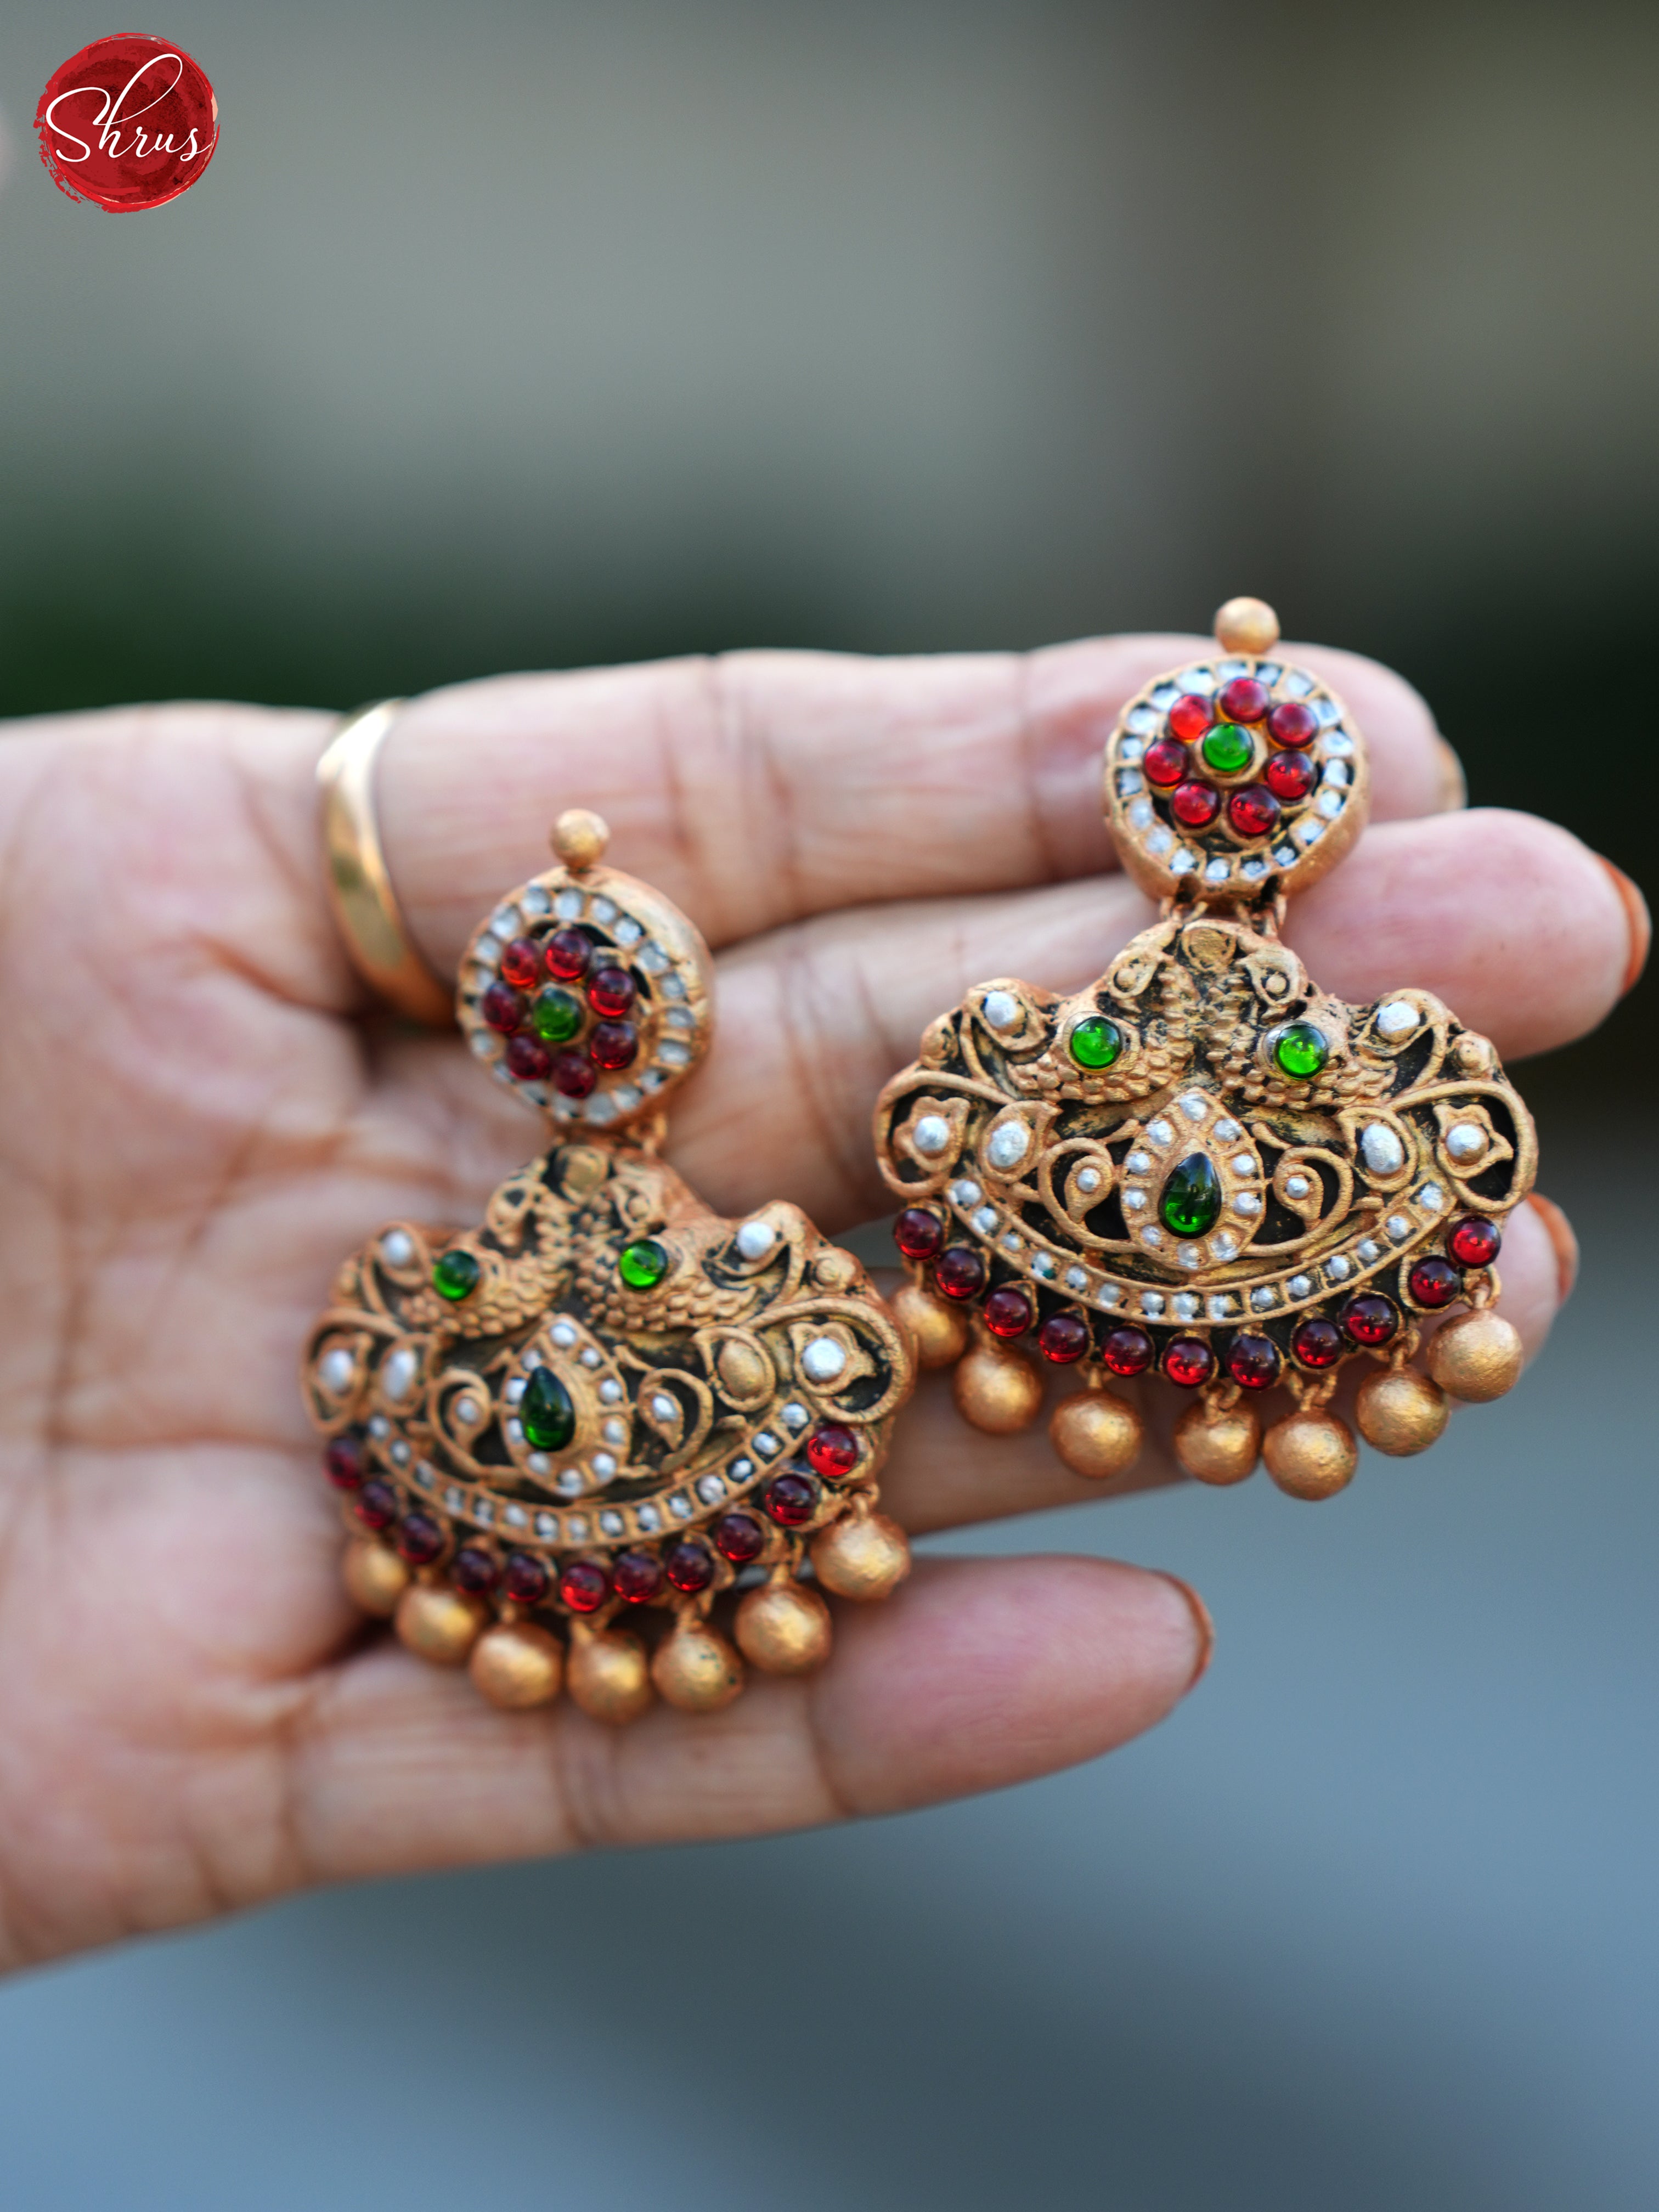 Handcrafted  Peacock Terracotta necklace with Chandballi Jhumkas- Accessories - Shop on ShrusEternity.com